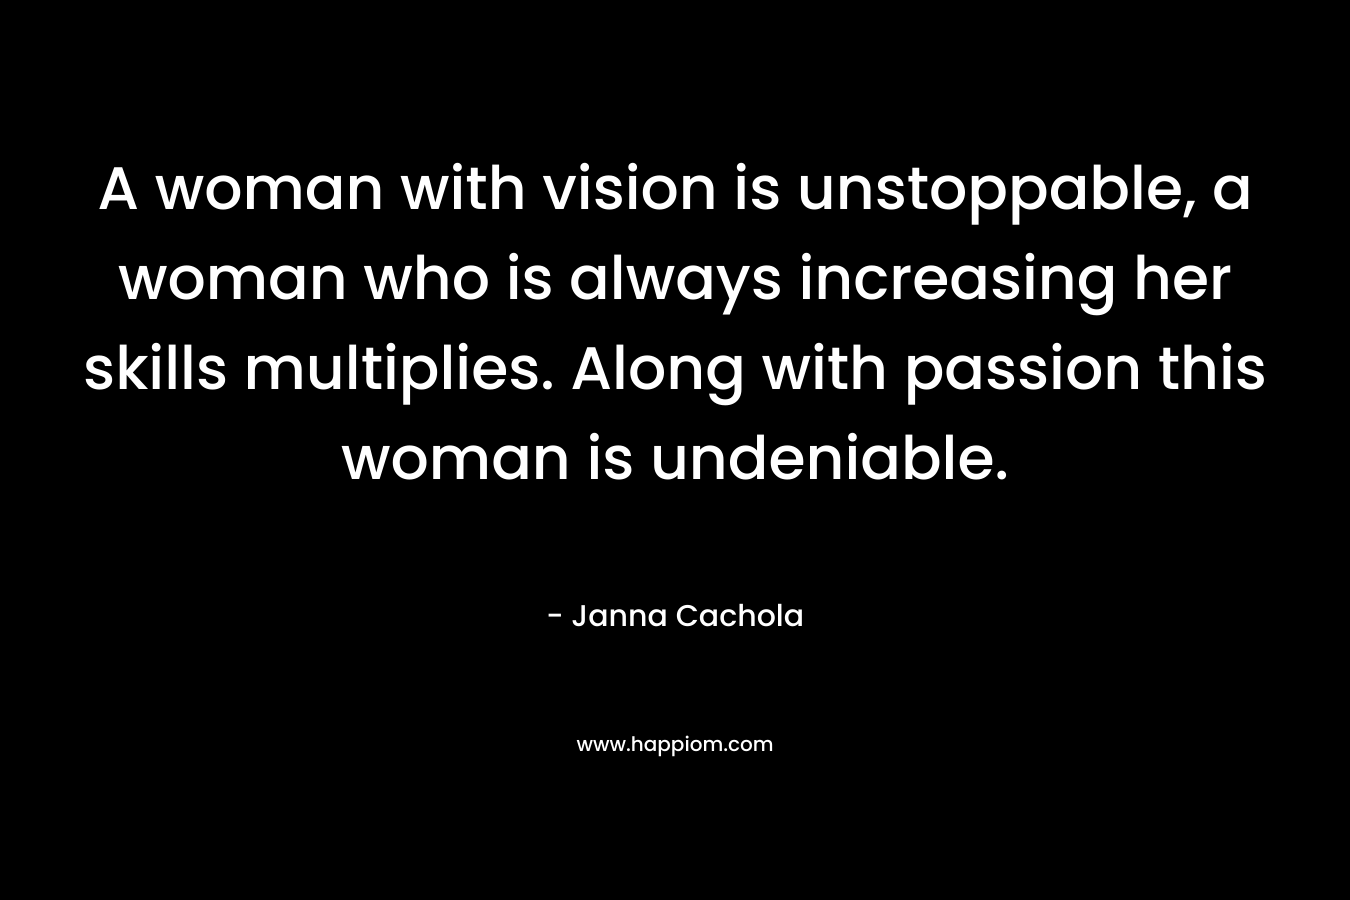 A woman with vision is unstoppable, a woman who is always increasing her skills multiplies. Along with passion this woman is undeniable. – Janna Cachola